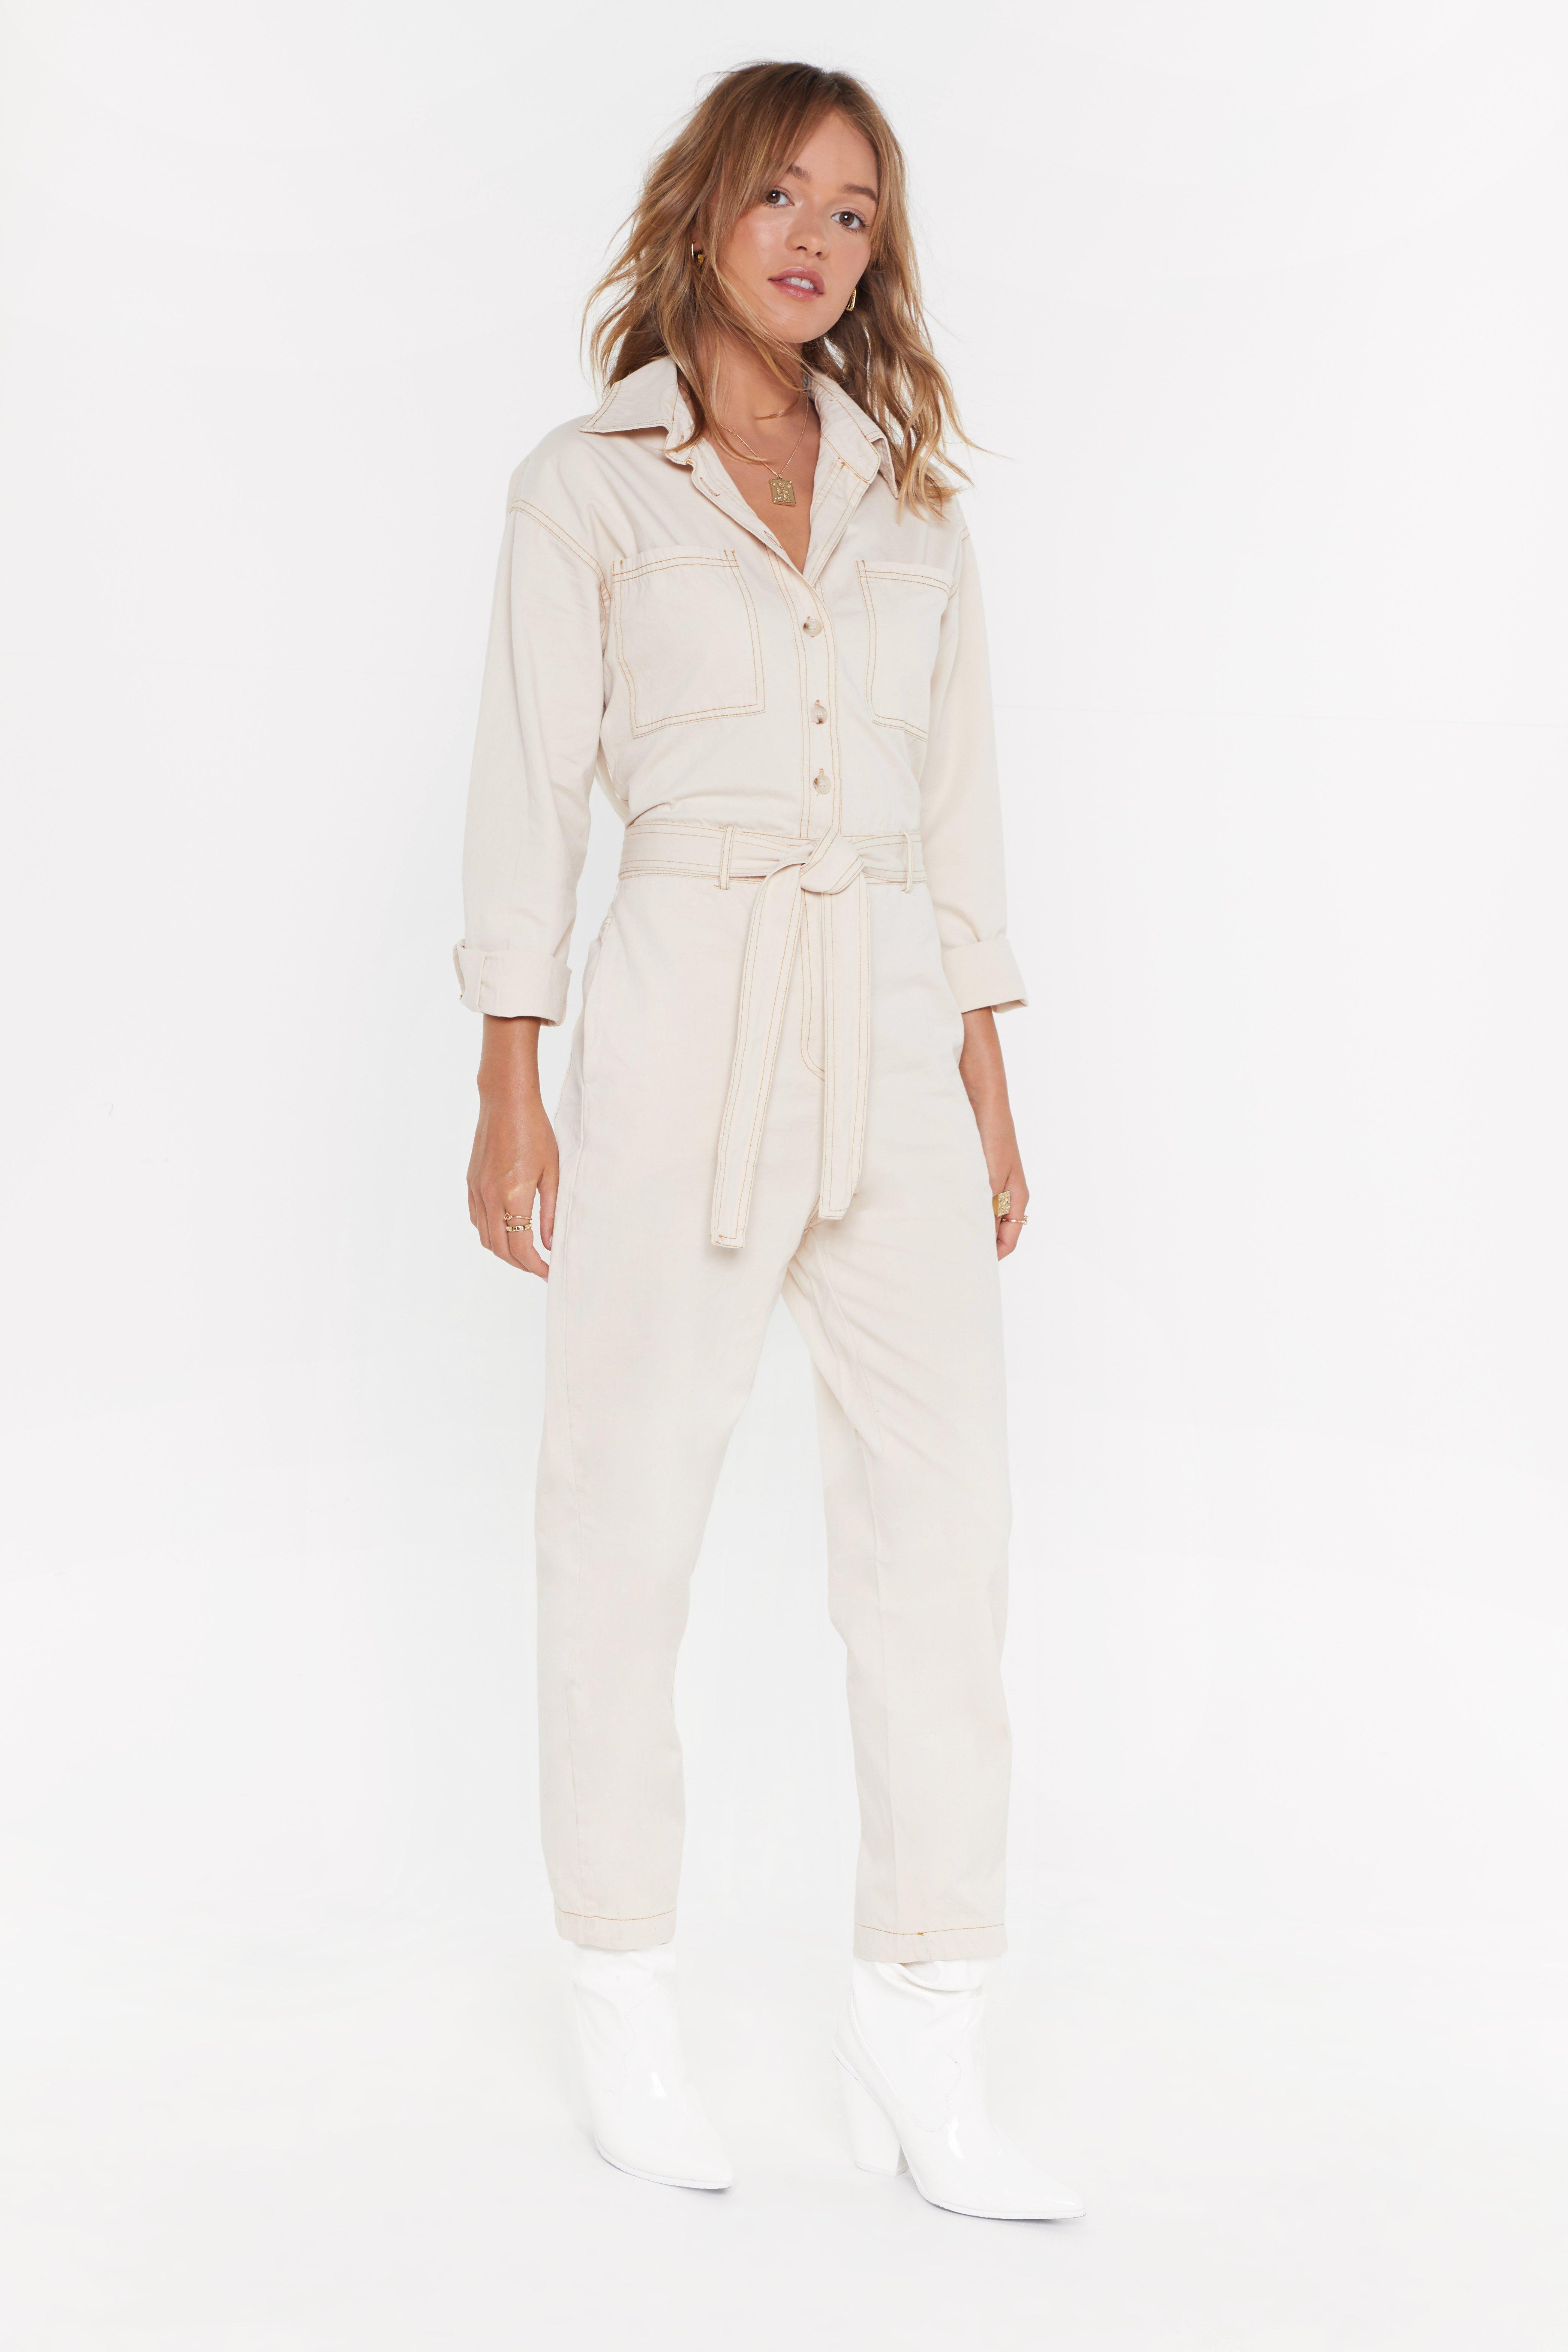 Jumpsuits | Women's Winter Jumpsuits | Nasty Gal